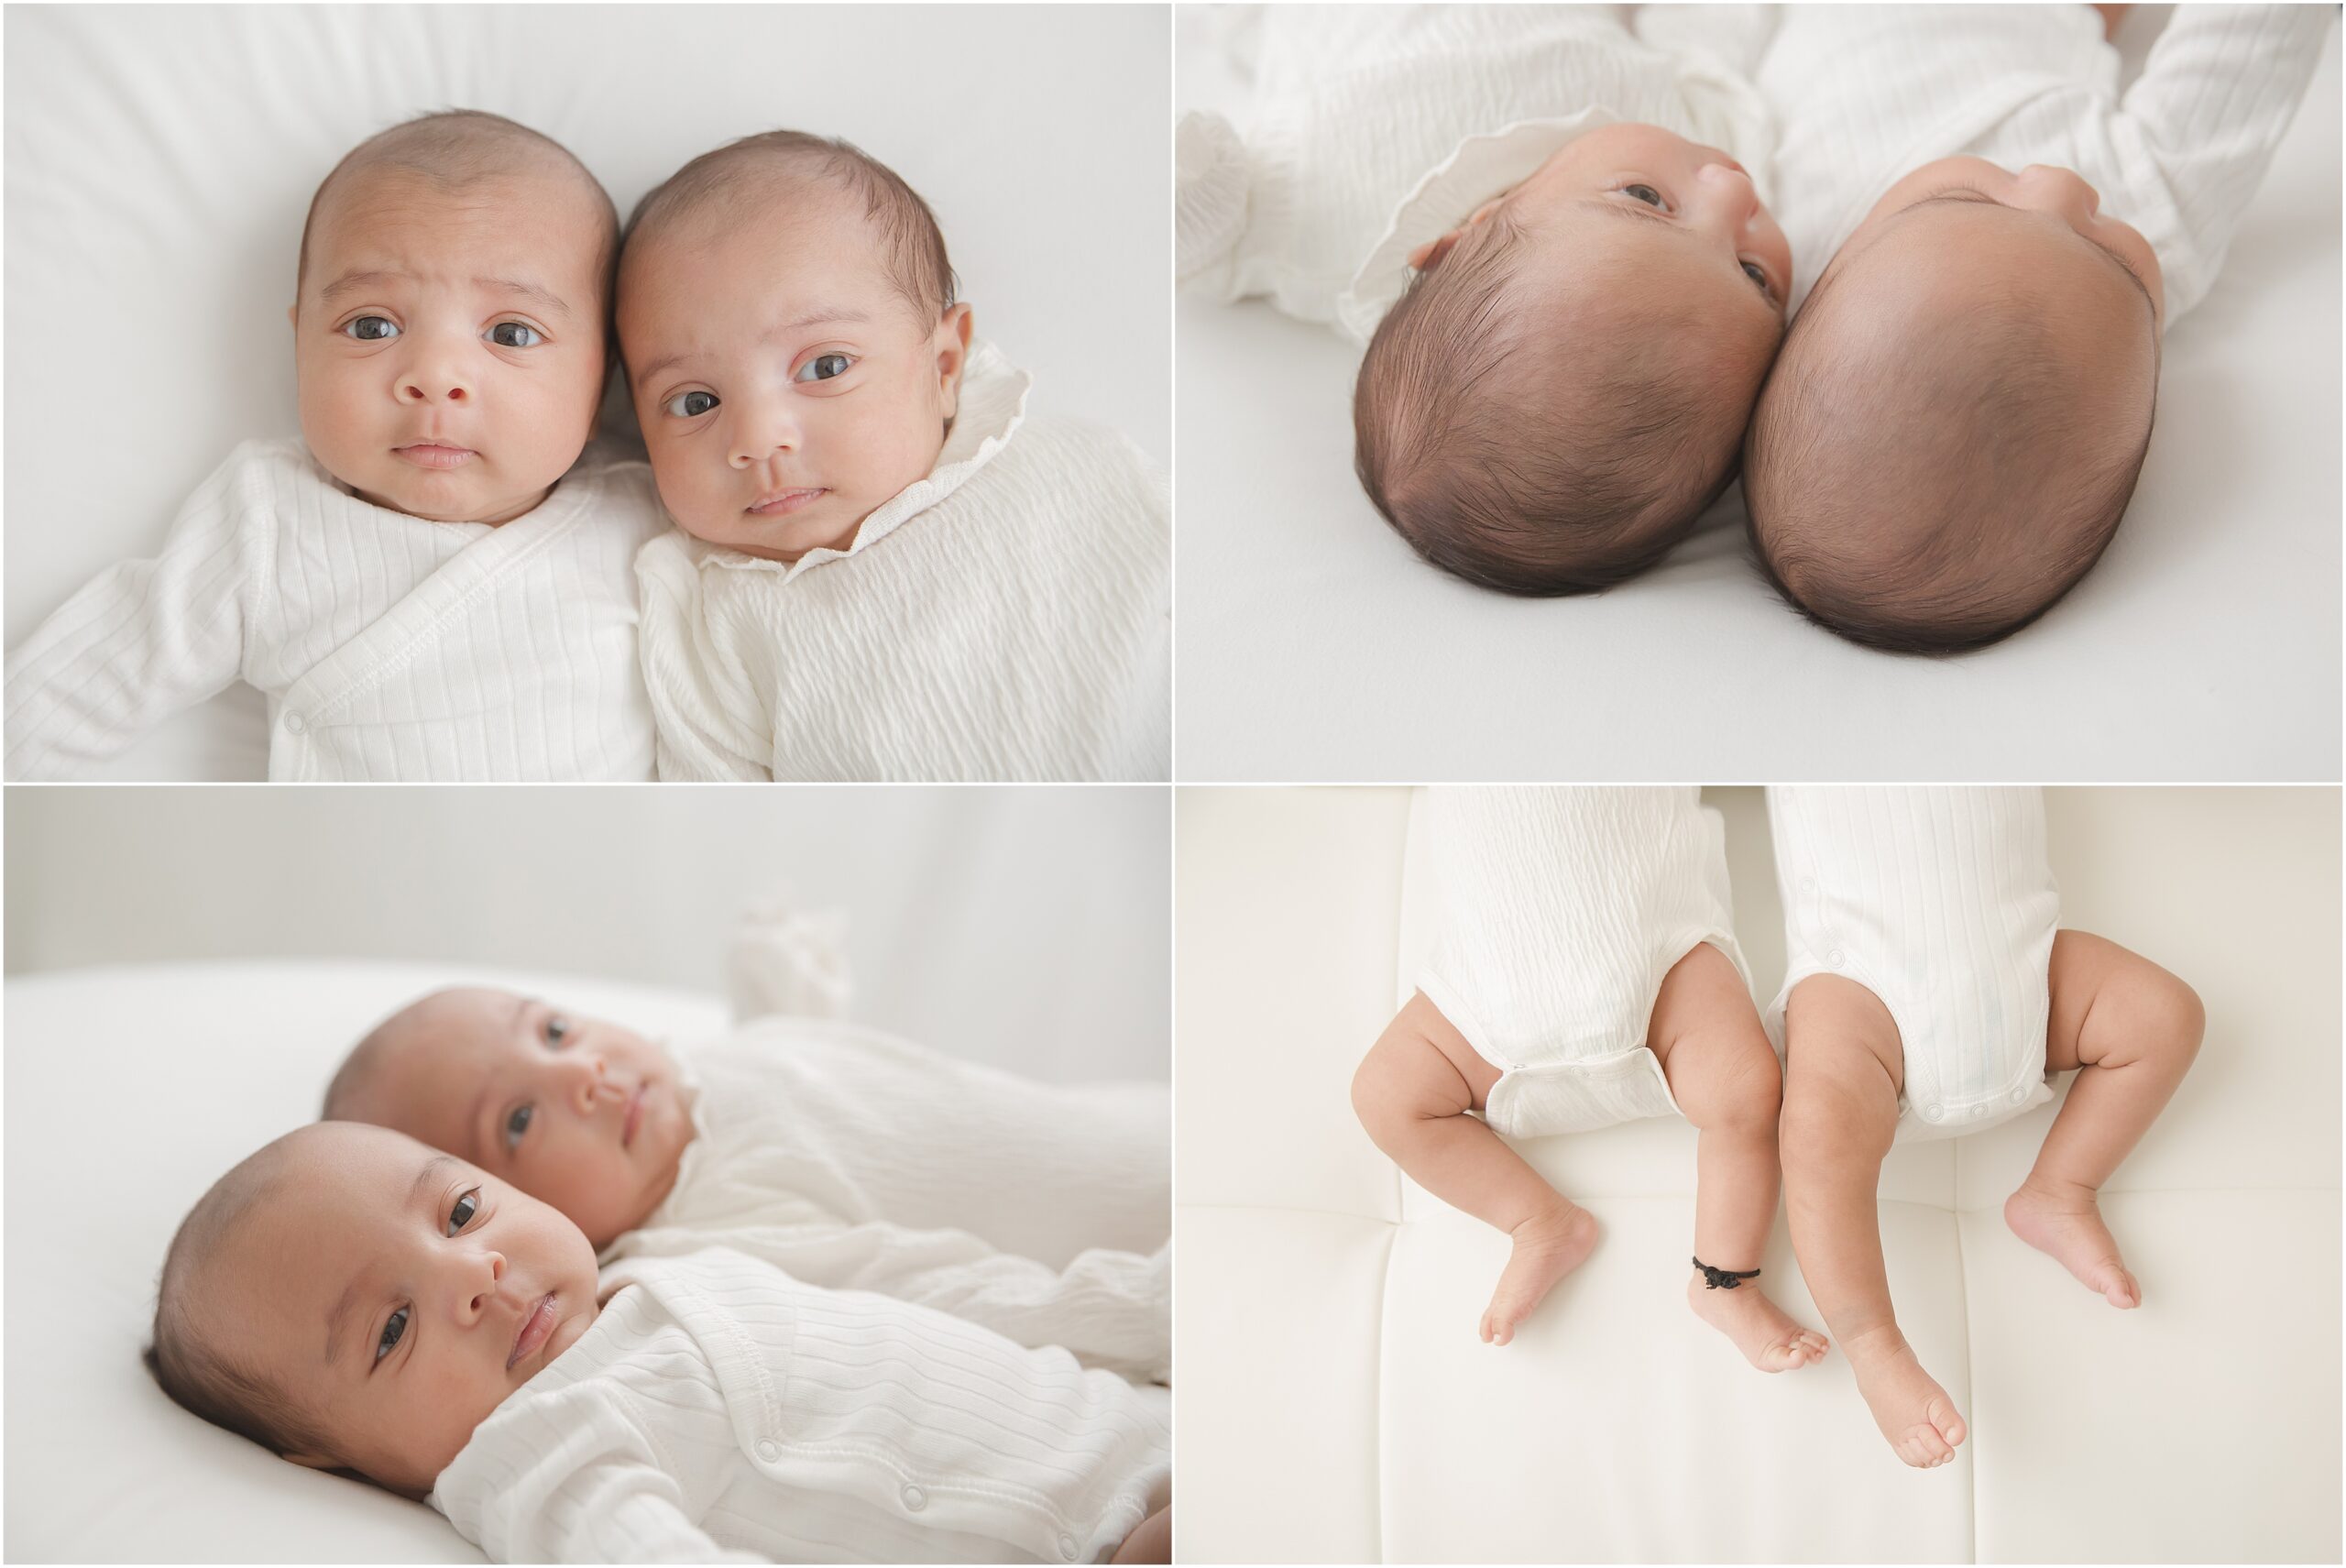 Newborn boy and girl twins wearing white outfits snuggle together on a white couch